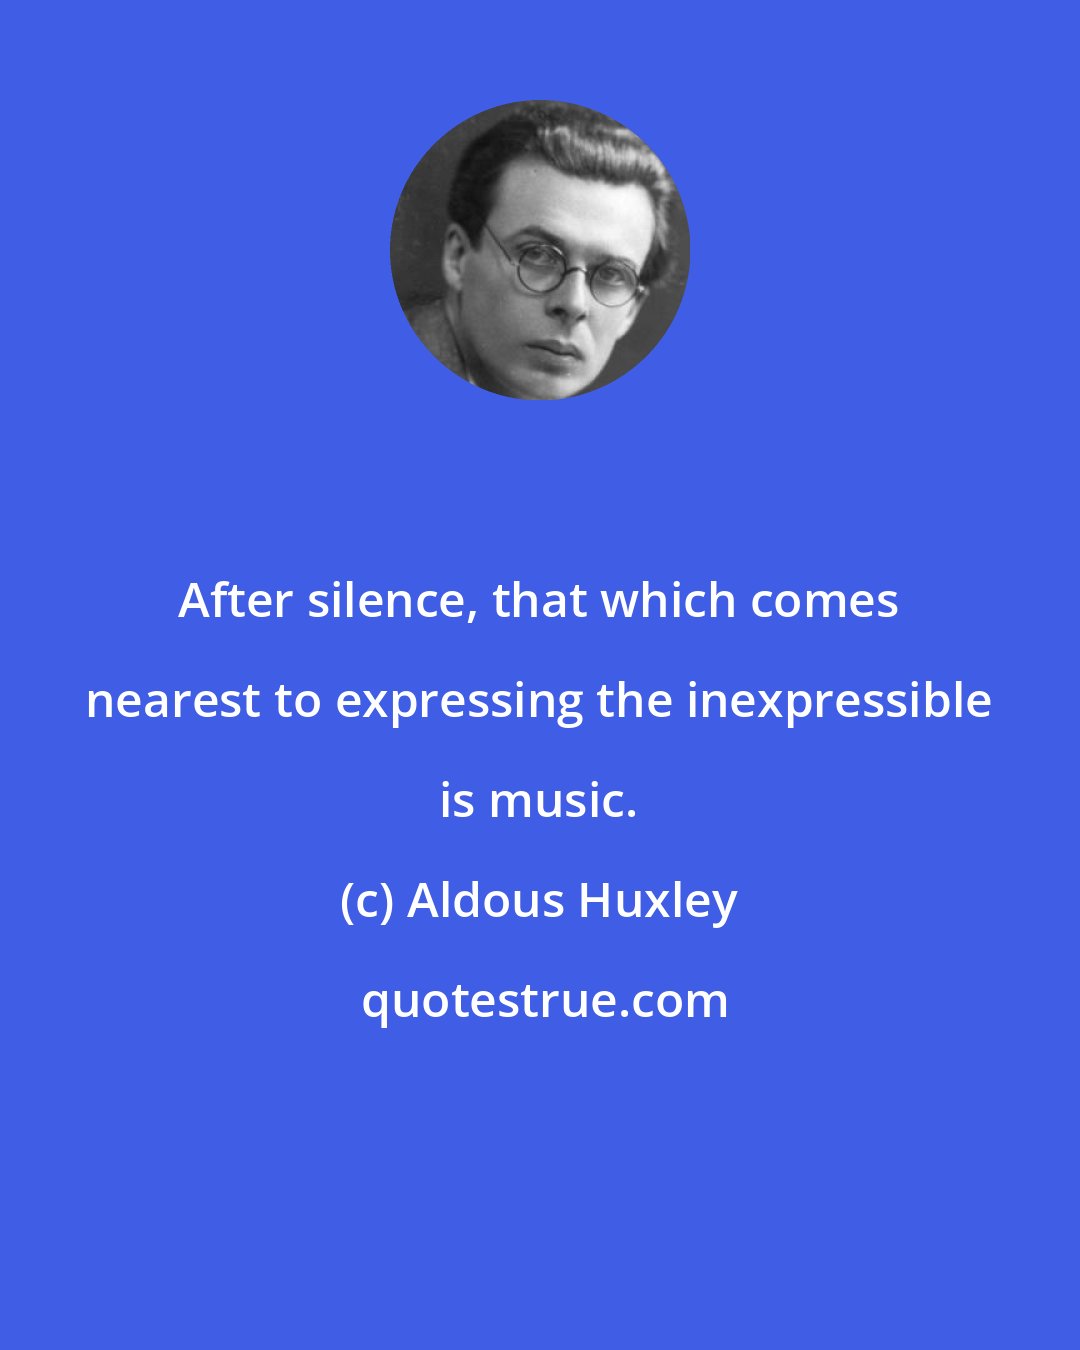 Aldous Huxley: After silence, that which comes nearest to expressing the inexpressible is music.